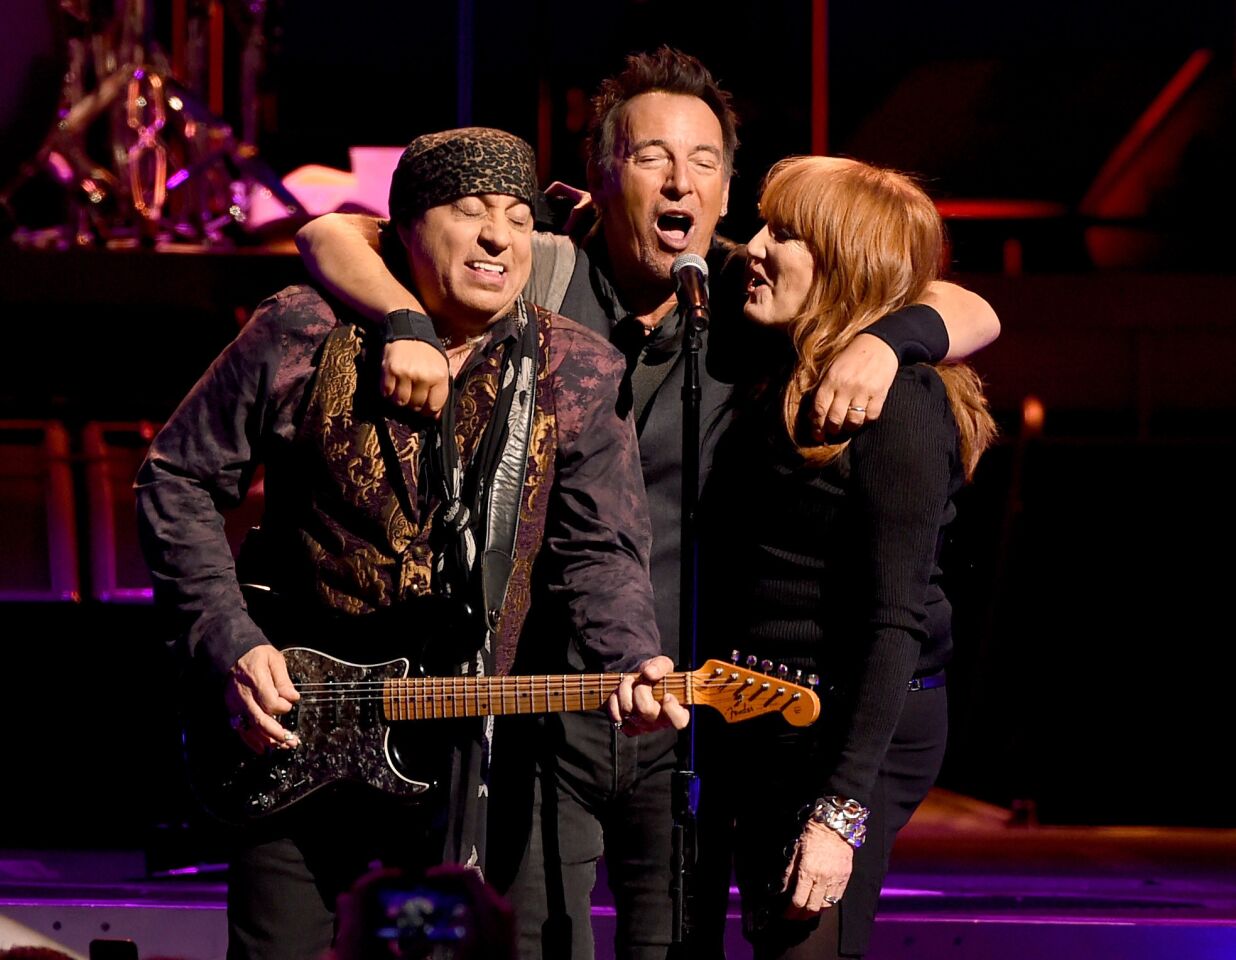 Bruce Springsteen, center, with Stevie Van Zandt, left, and Patti Scialfa played the first of three shows at the Los Angeles Sports Arena on March 15, 2016.